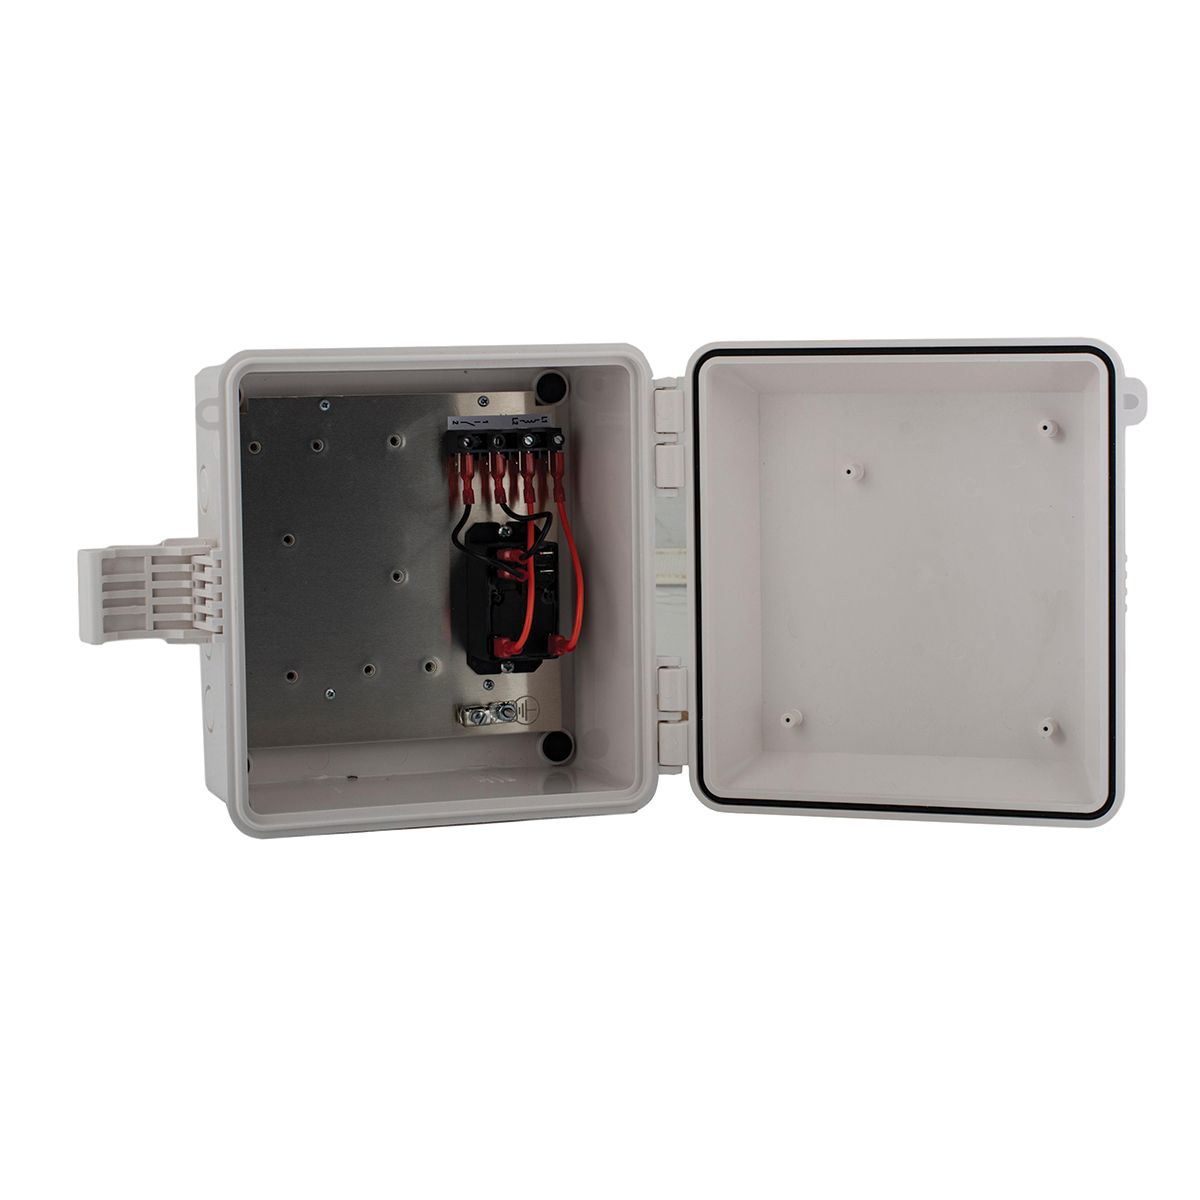 very easy to fit and operate Mains Power Failure Alarm 1 